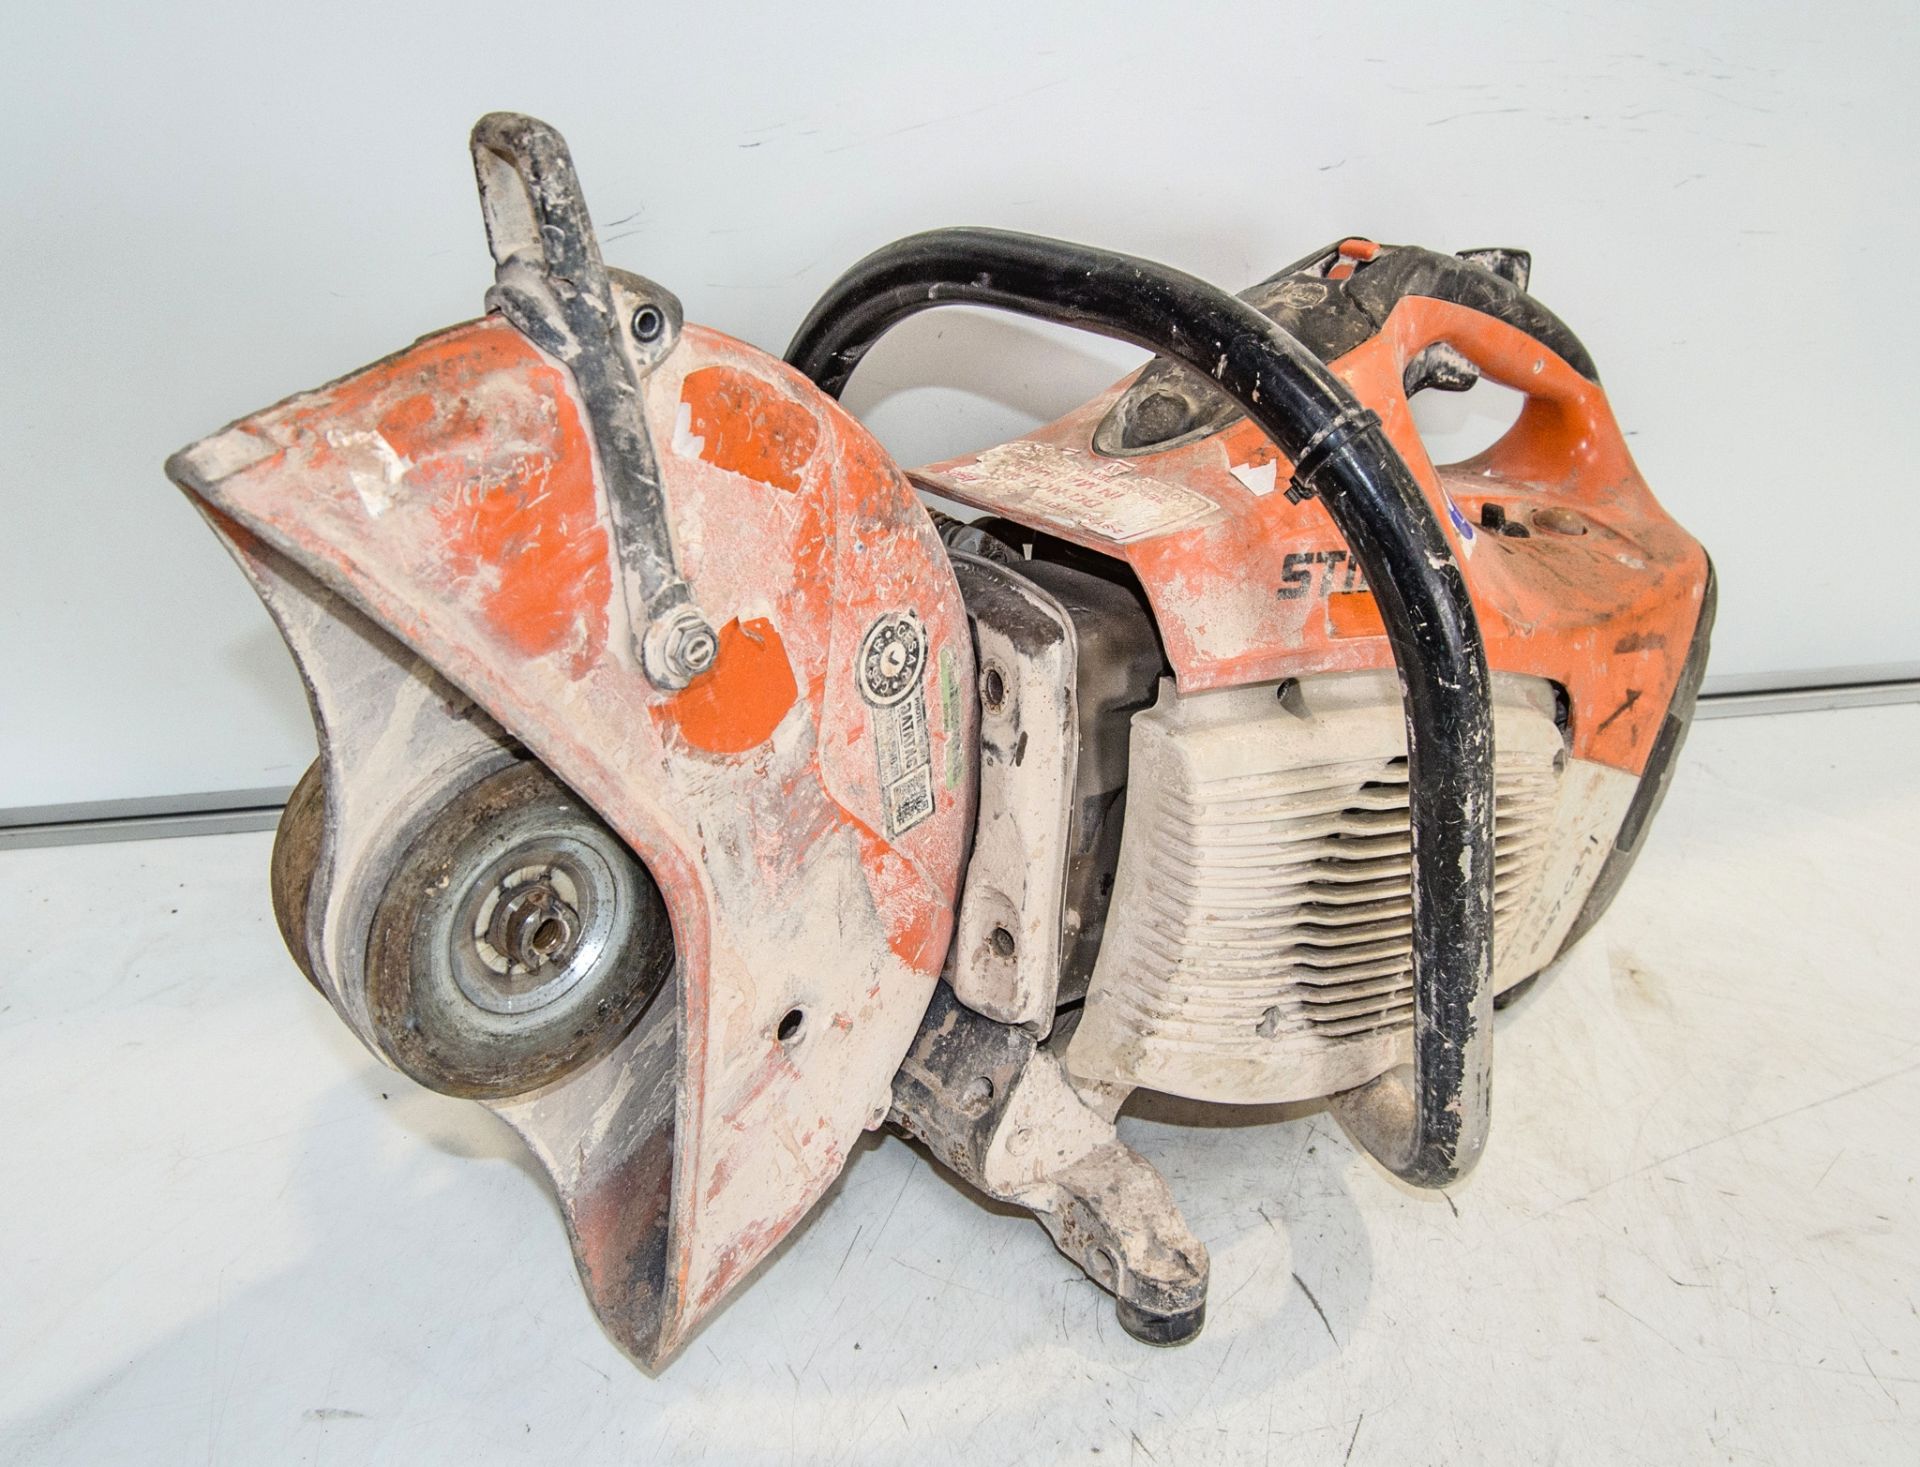 Stihl TS410 petrol driven cut off saw ** Pull cord assembly missing and parts loose **